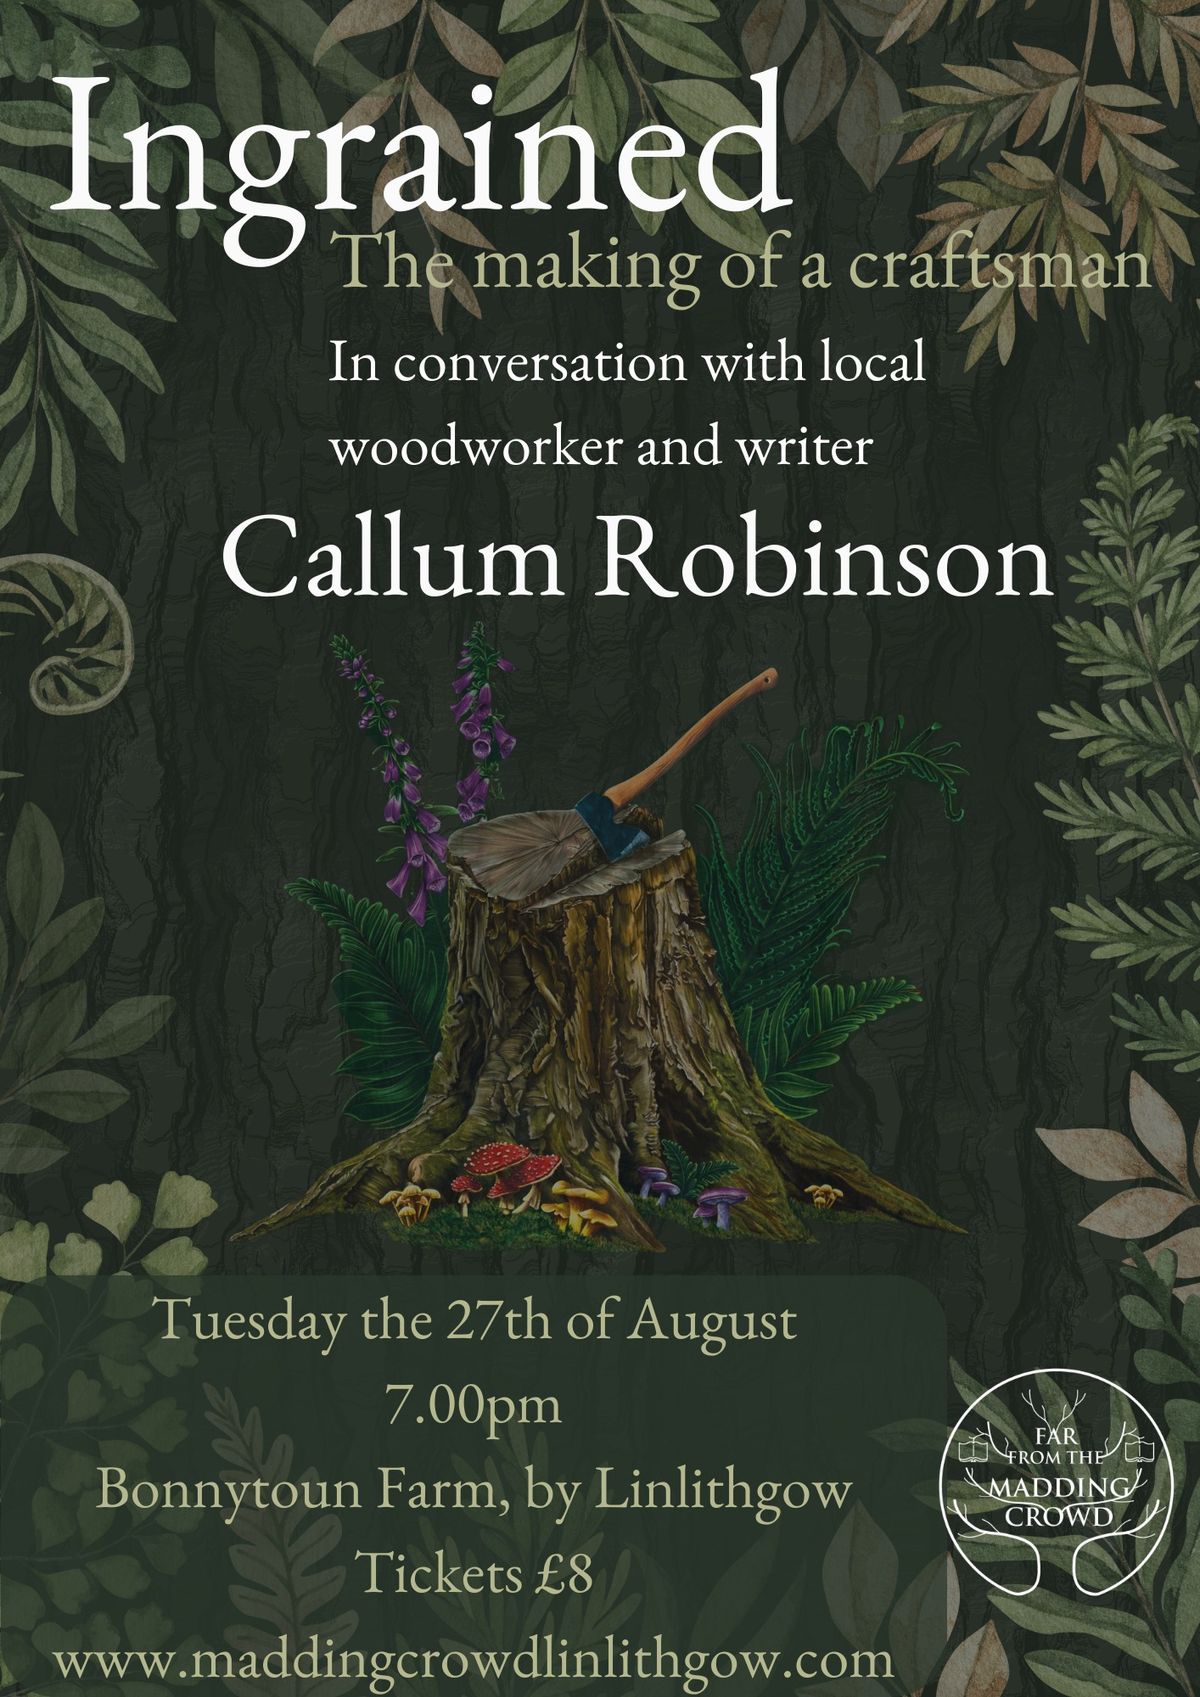 In conversation with Callum Robinson, Ingrained: The making of a craftsman a 